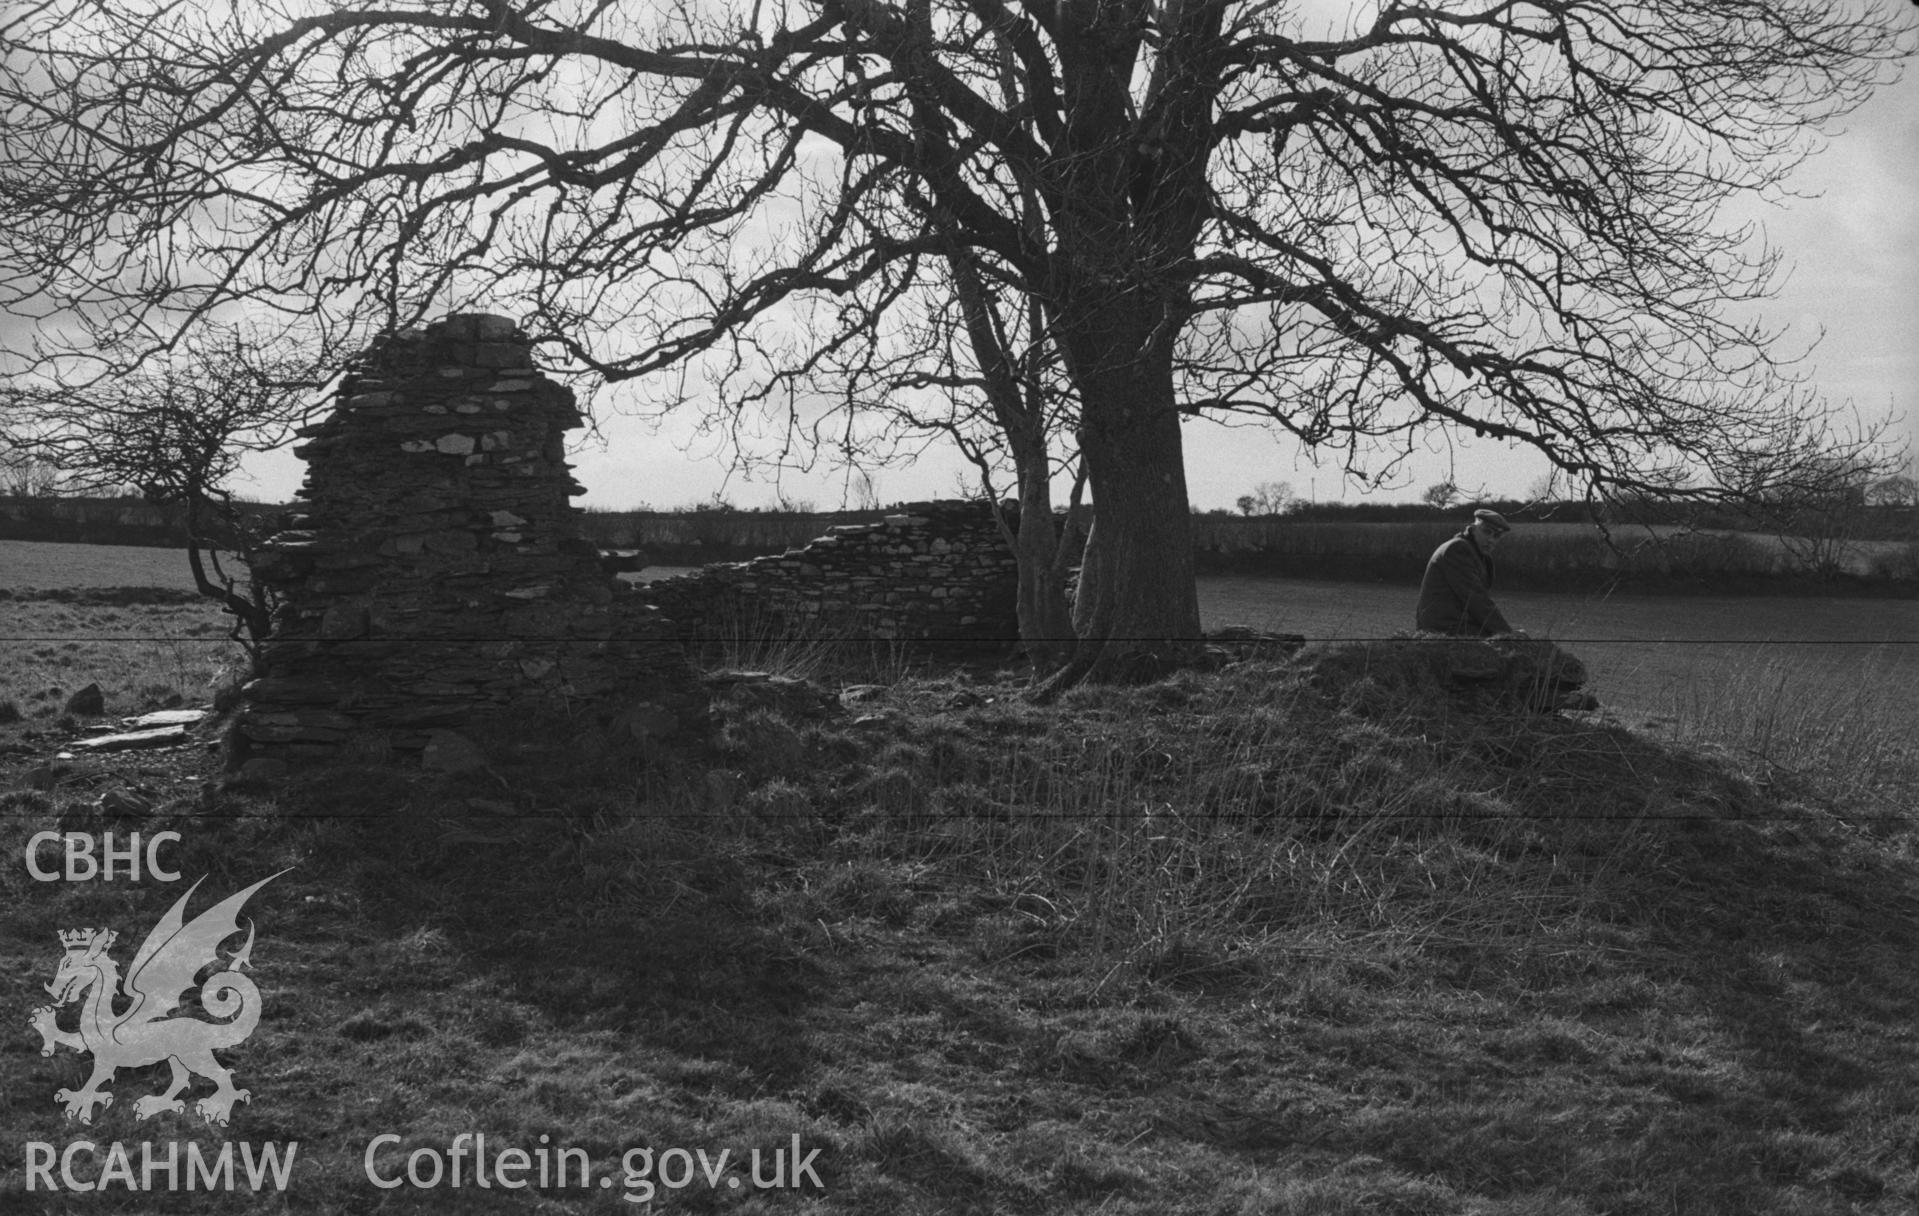 Digital copy of a black and white negative showing ruin of St Mary's church, Llanfair Trefhelygen. Photographed in April 1963 by Arthur O. Chater from Grid Reference SN 3440 4413, looking west.